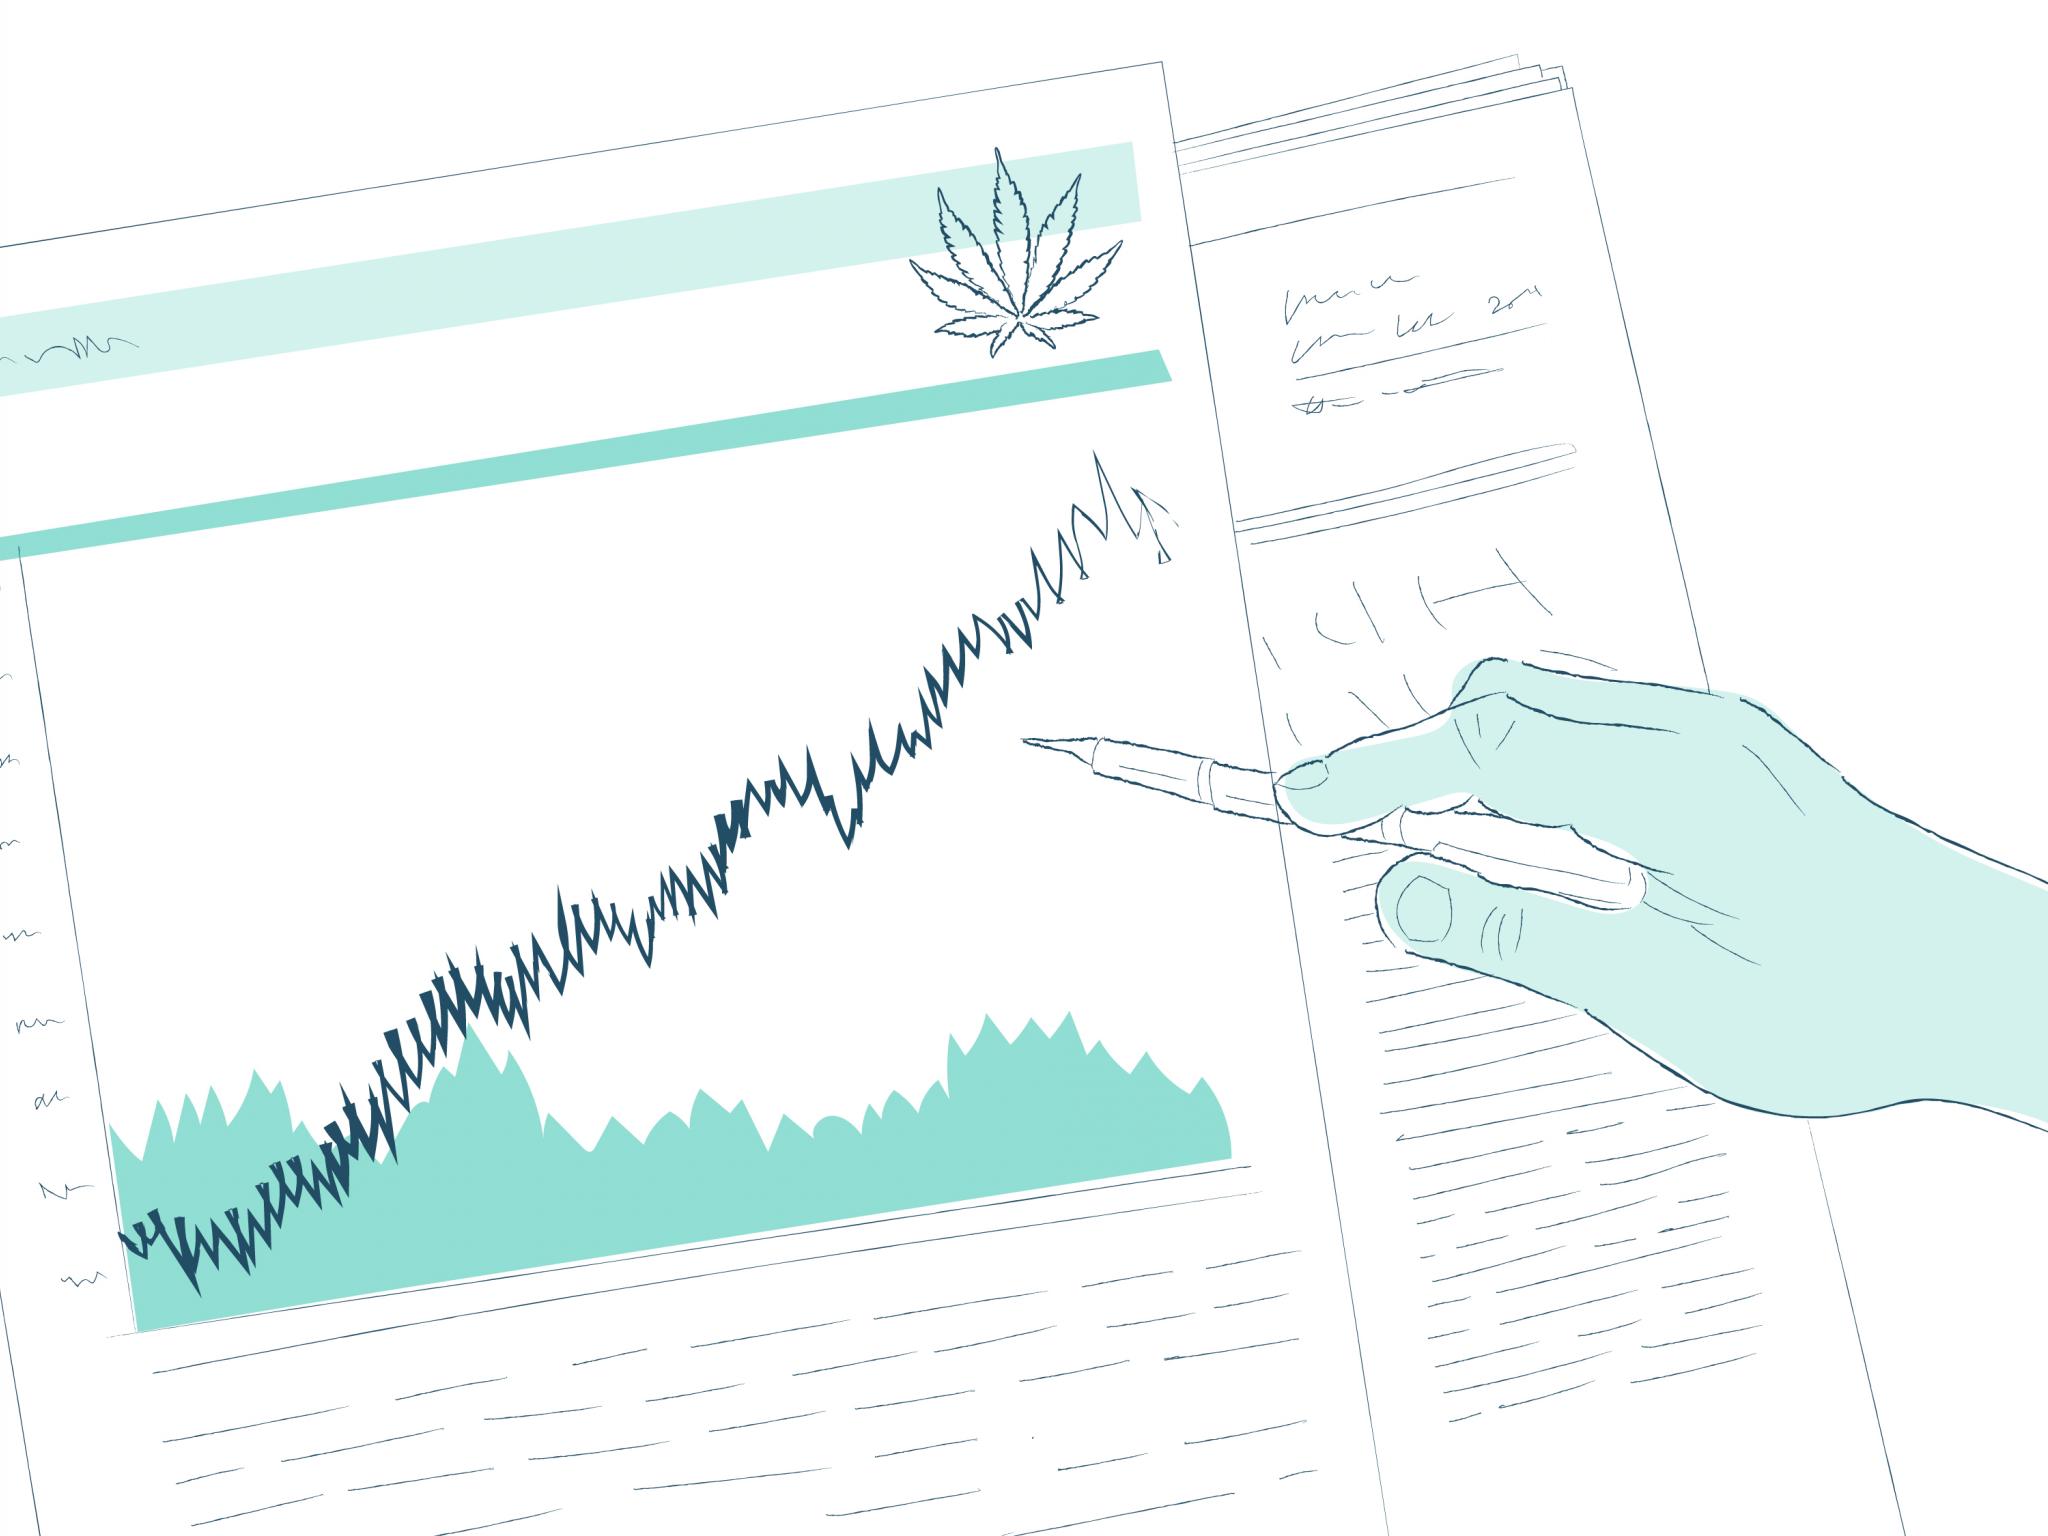  cannabis-stock-gainers-and-losers-from-may-3-2021 